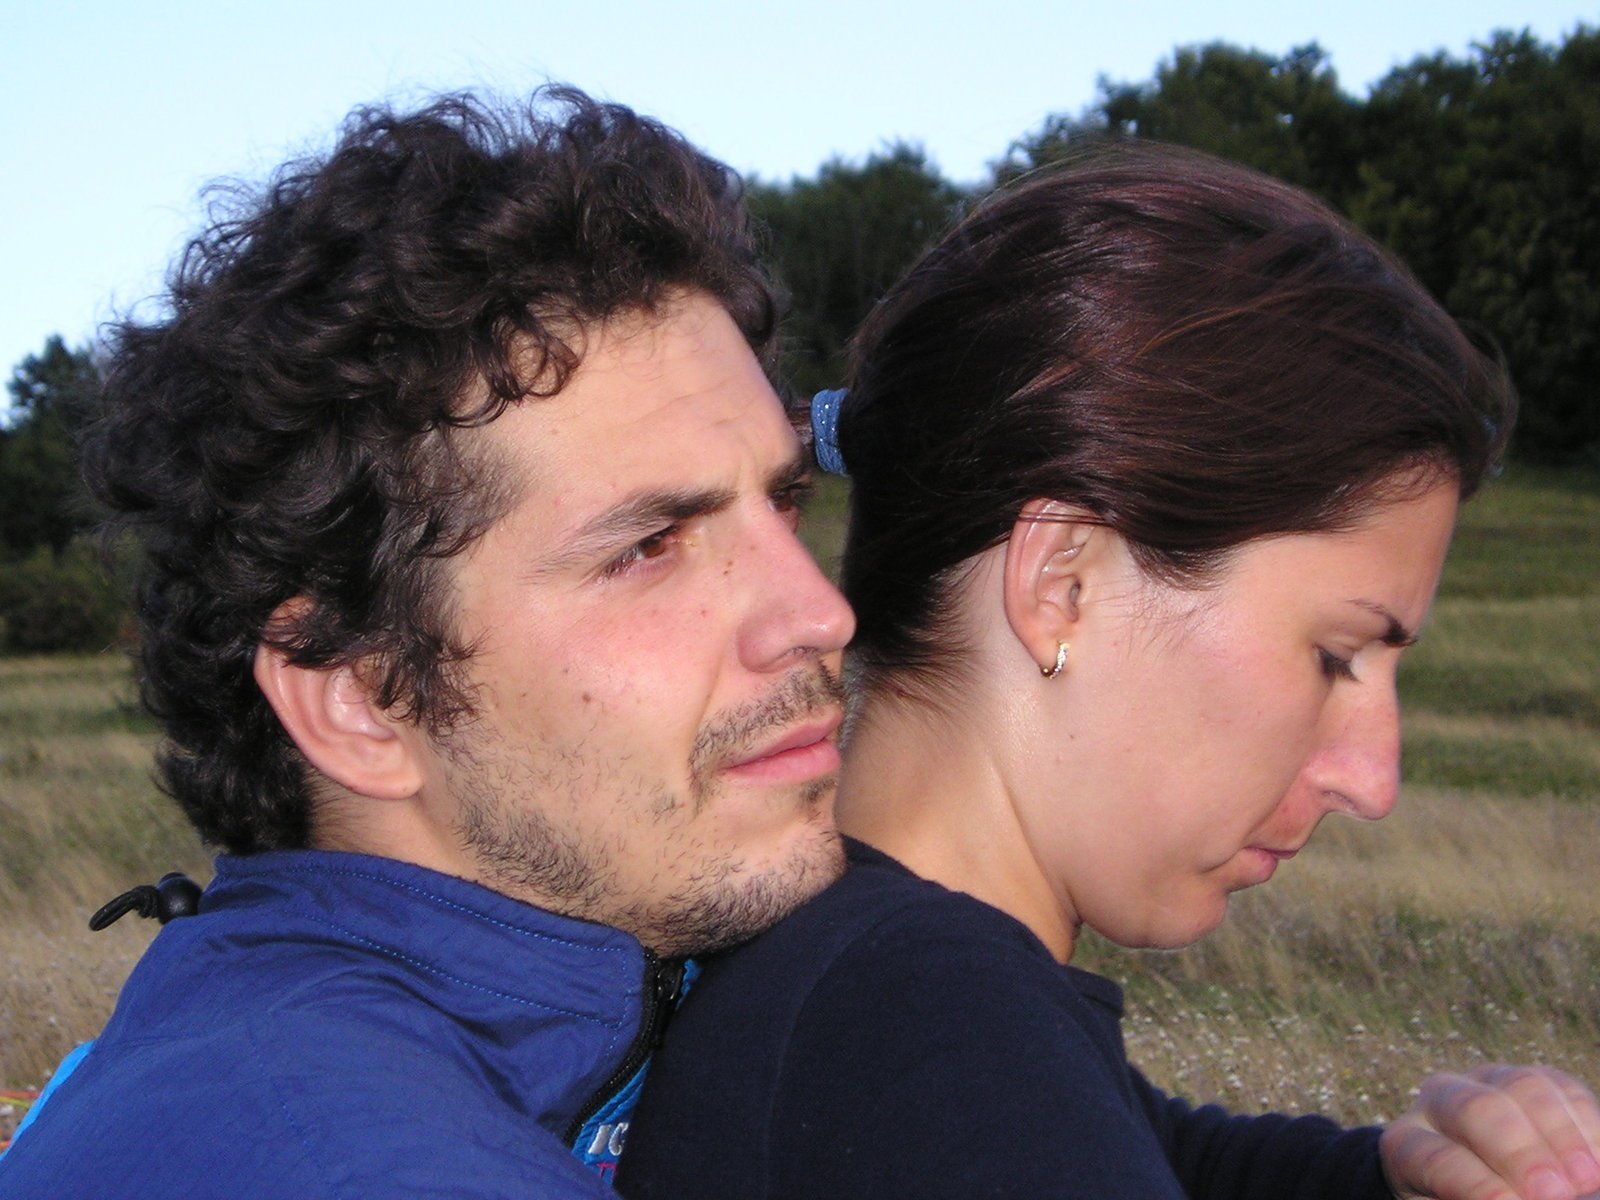 two people standing close to each other in the wild